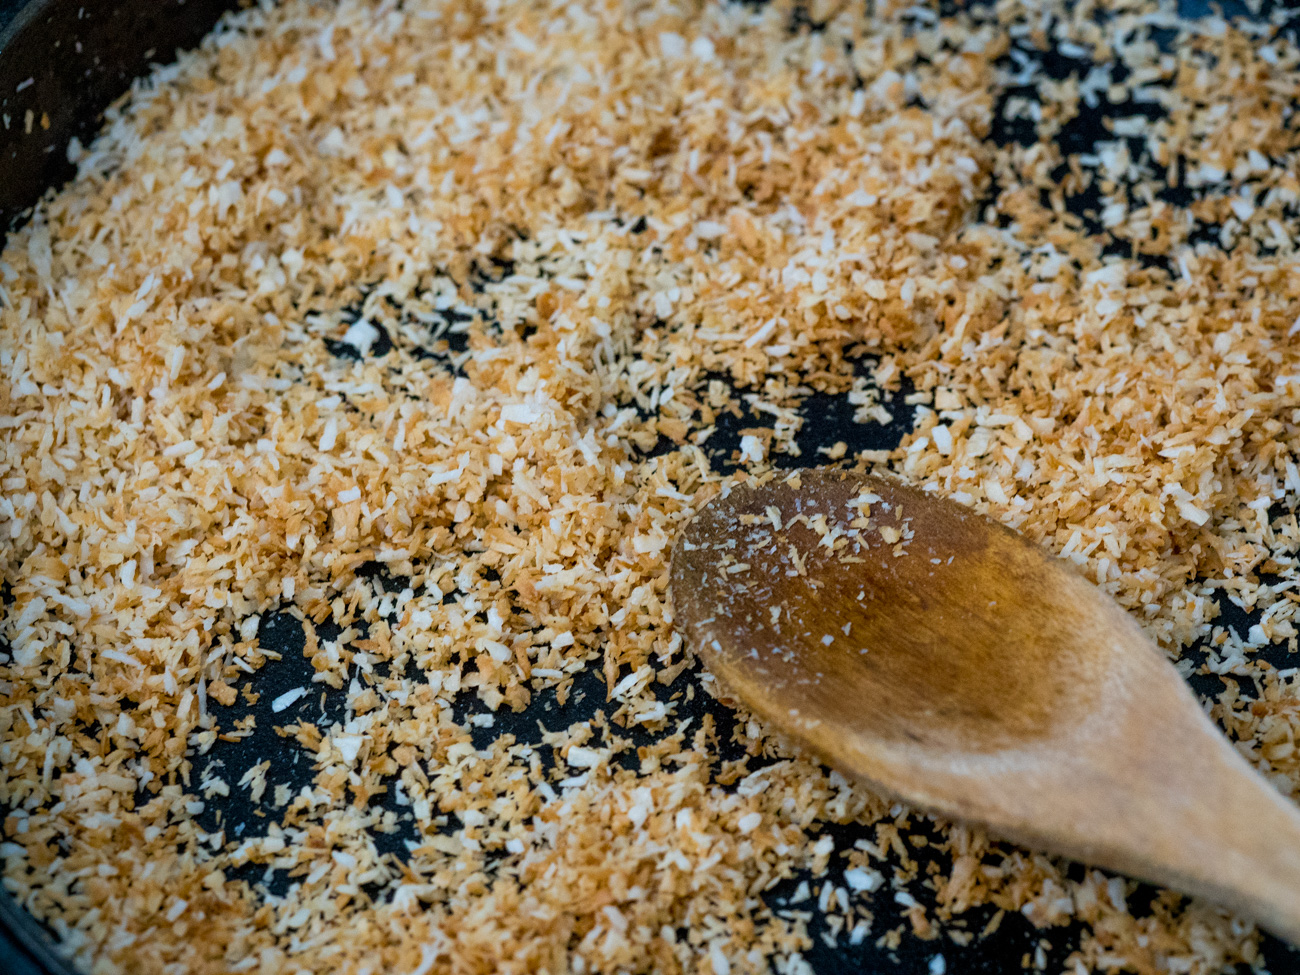 Preheat oven to 375˚F. Heat a skillet to low-medium heat. Place 1/2 cup shredded coconut in skillet and stir constantly until toasted. Do not overcook. Remove from pan and set aside.